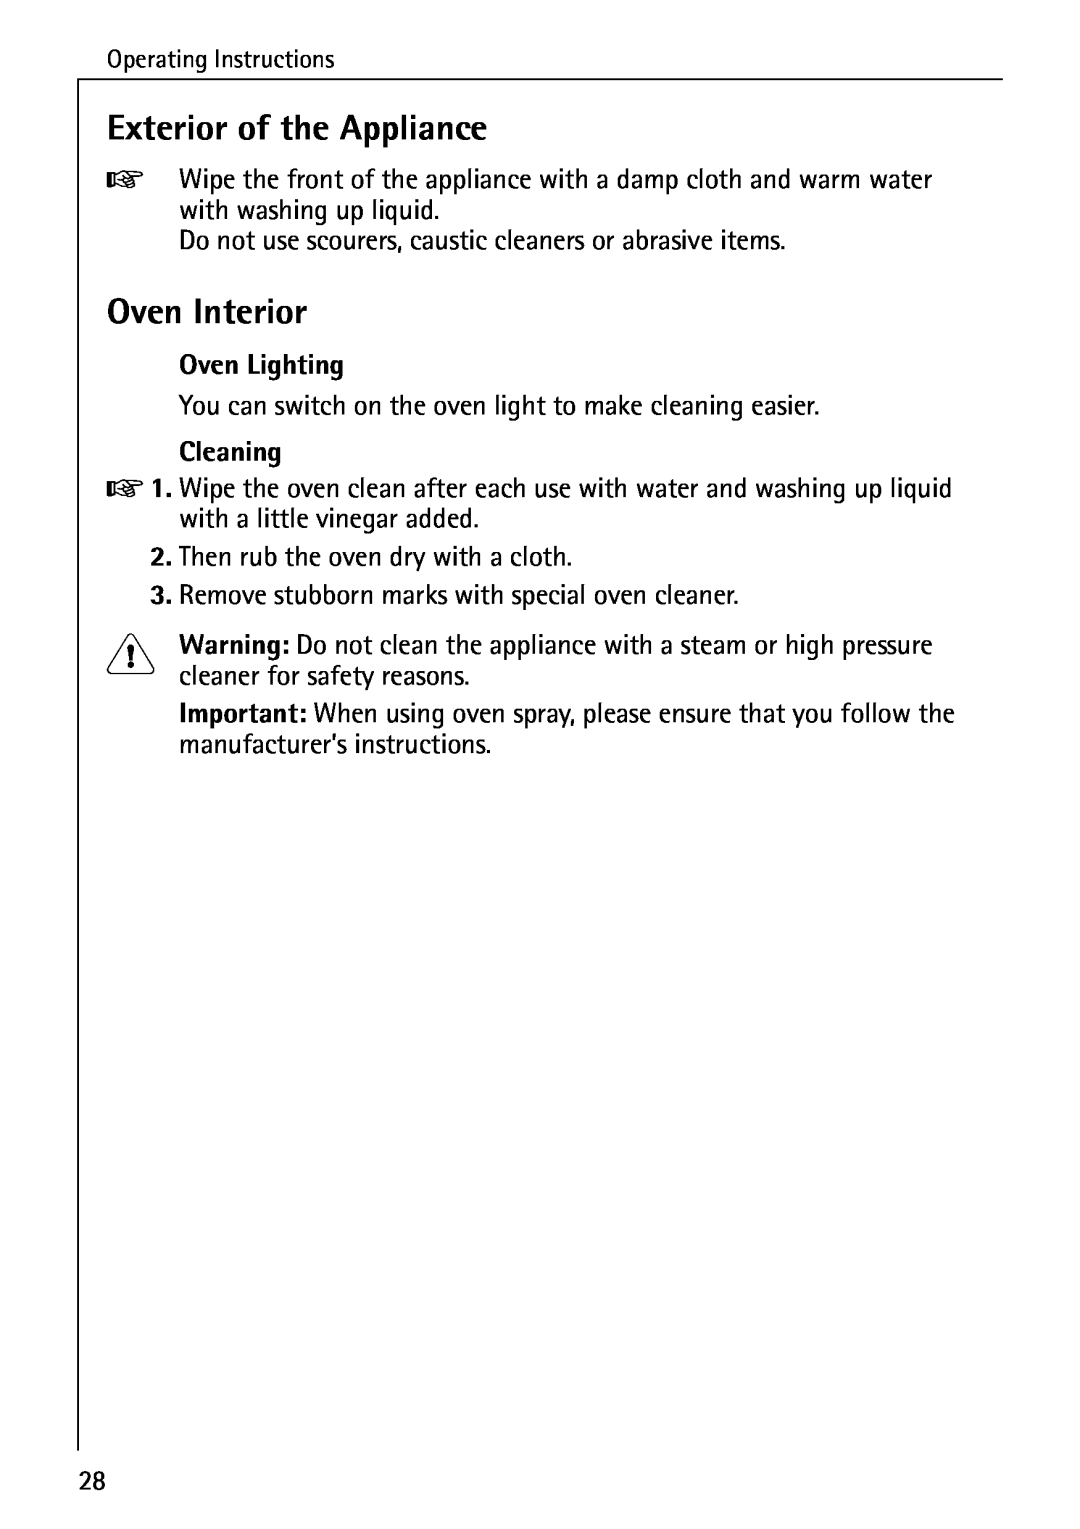 AEG 2003 F operating instructions Exterior of the Appliance, Oven Interior, Oven Lighting, Cleaning 